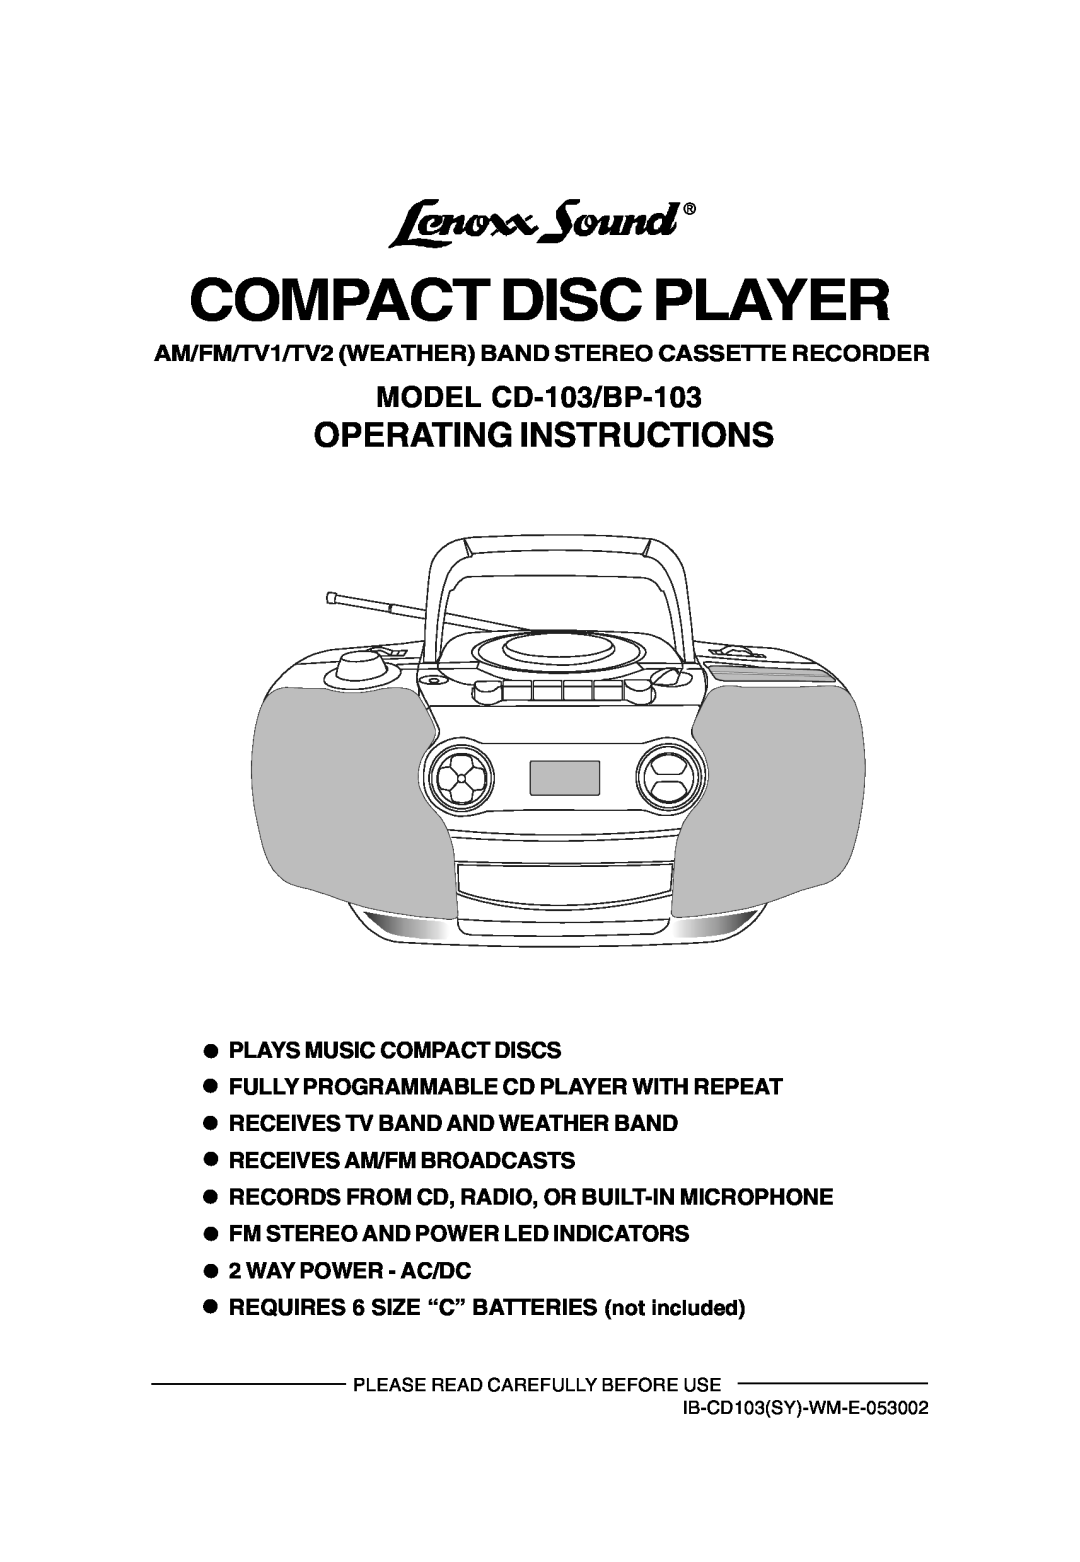 Lenoxx Electronics operating instructions Operating Instructions, MODEL CD-103/BP-103, Compact Disc Player 